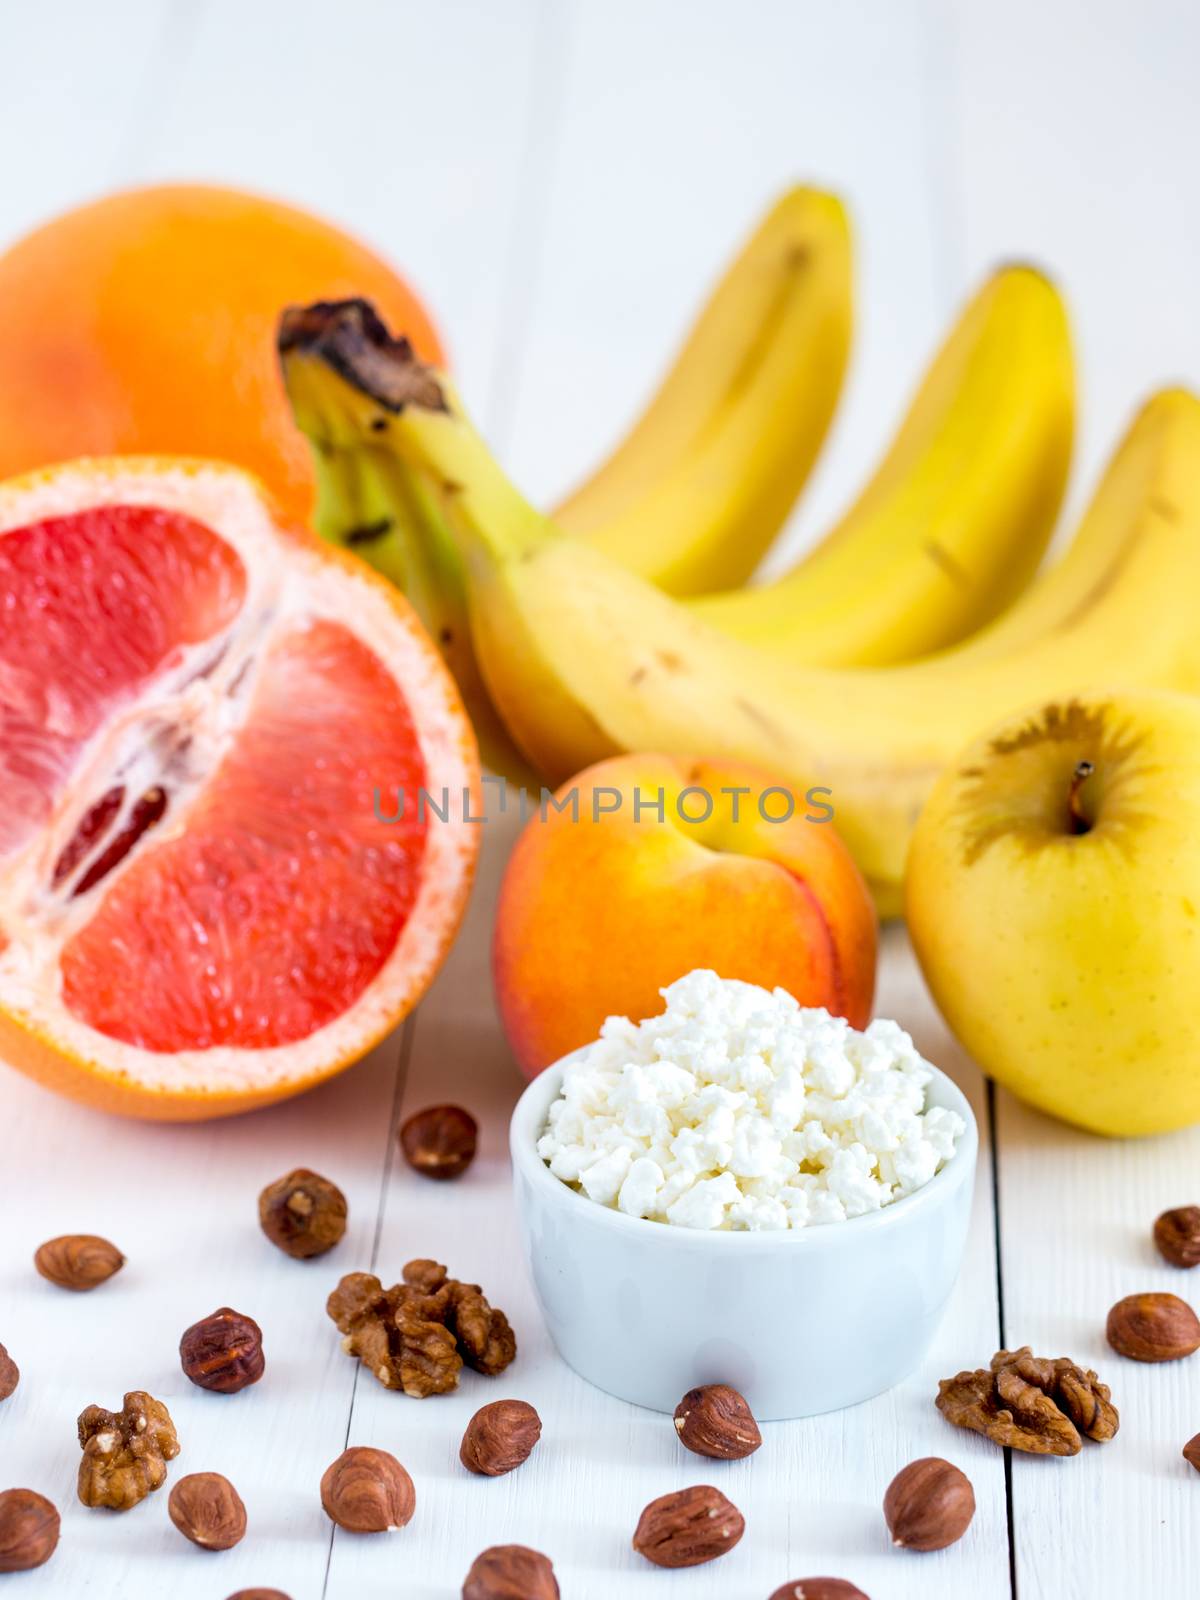 Healthy breakfast: cottage cheese, fruits and nuts on white wooden background. Dieting, healthy lifestyle concept meal. Vertical